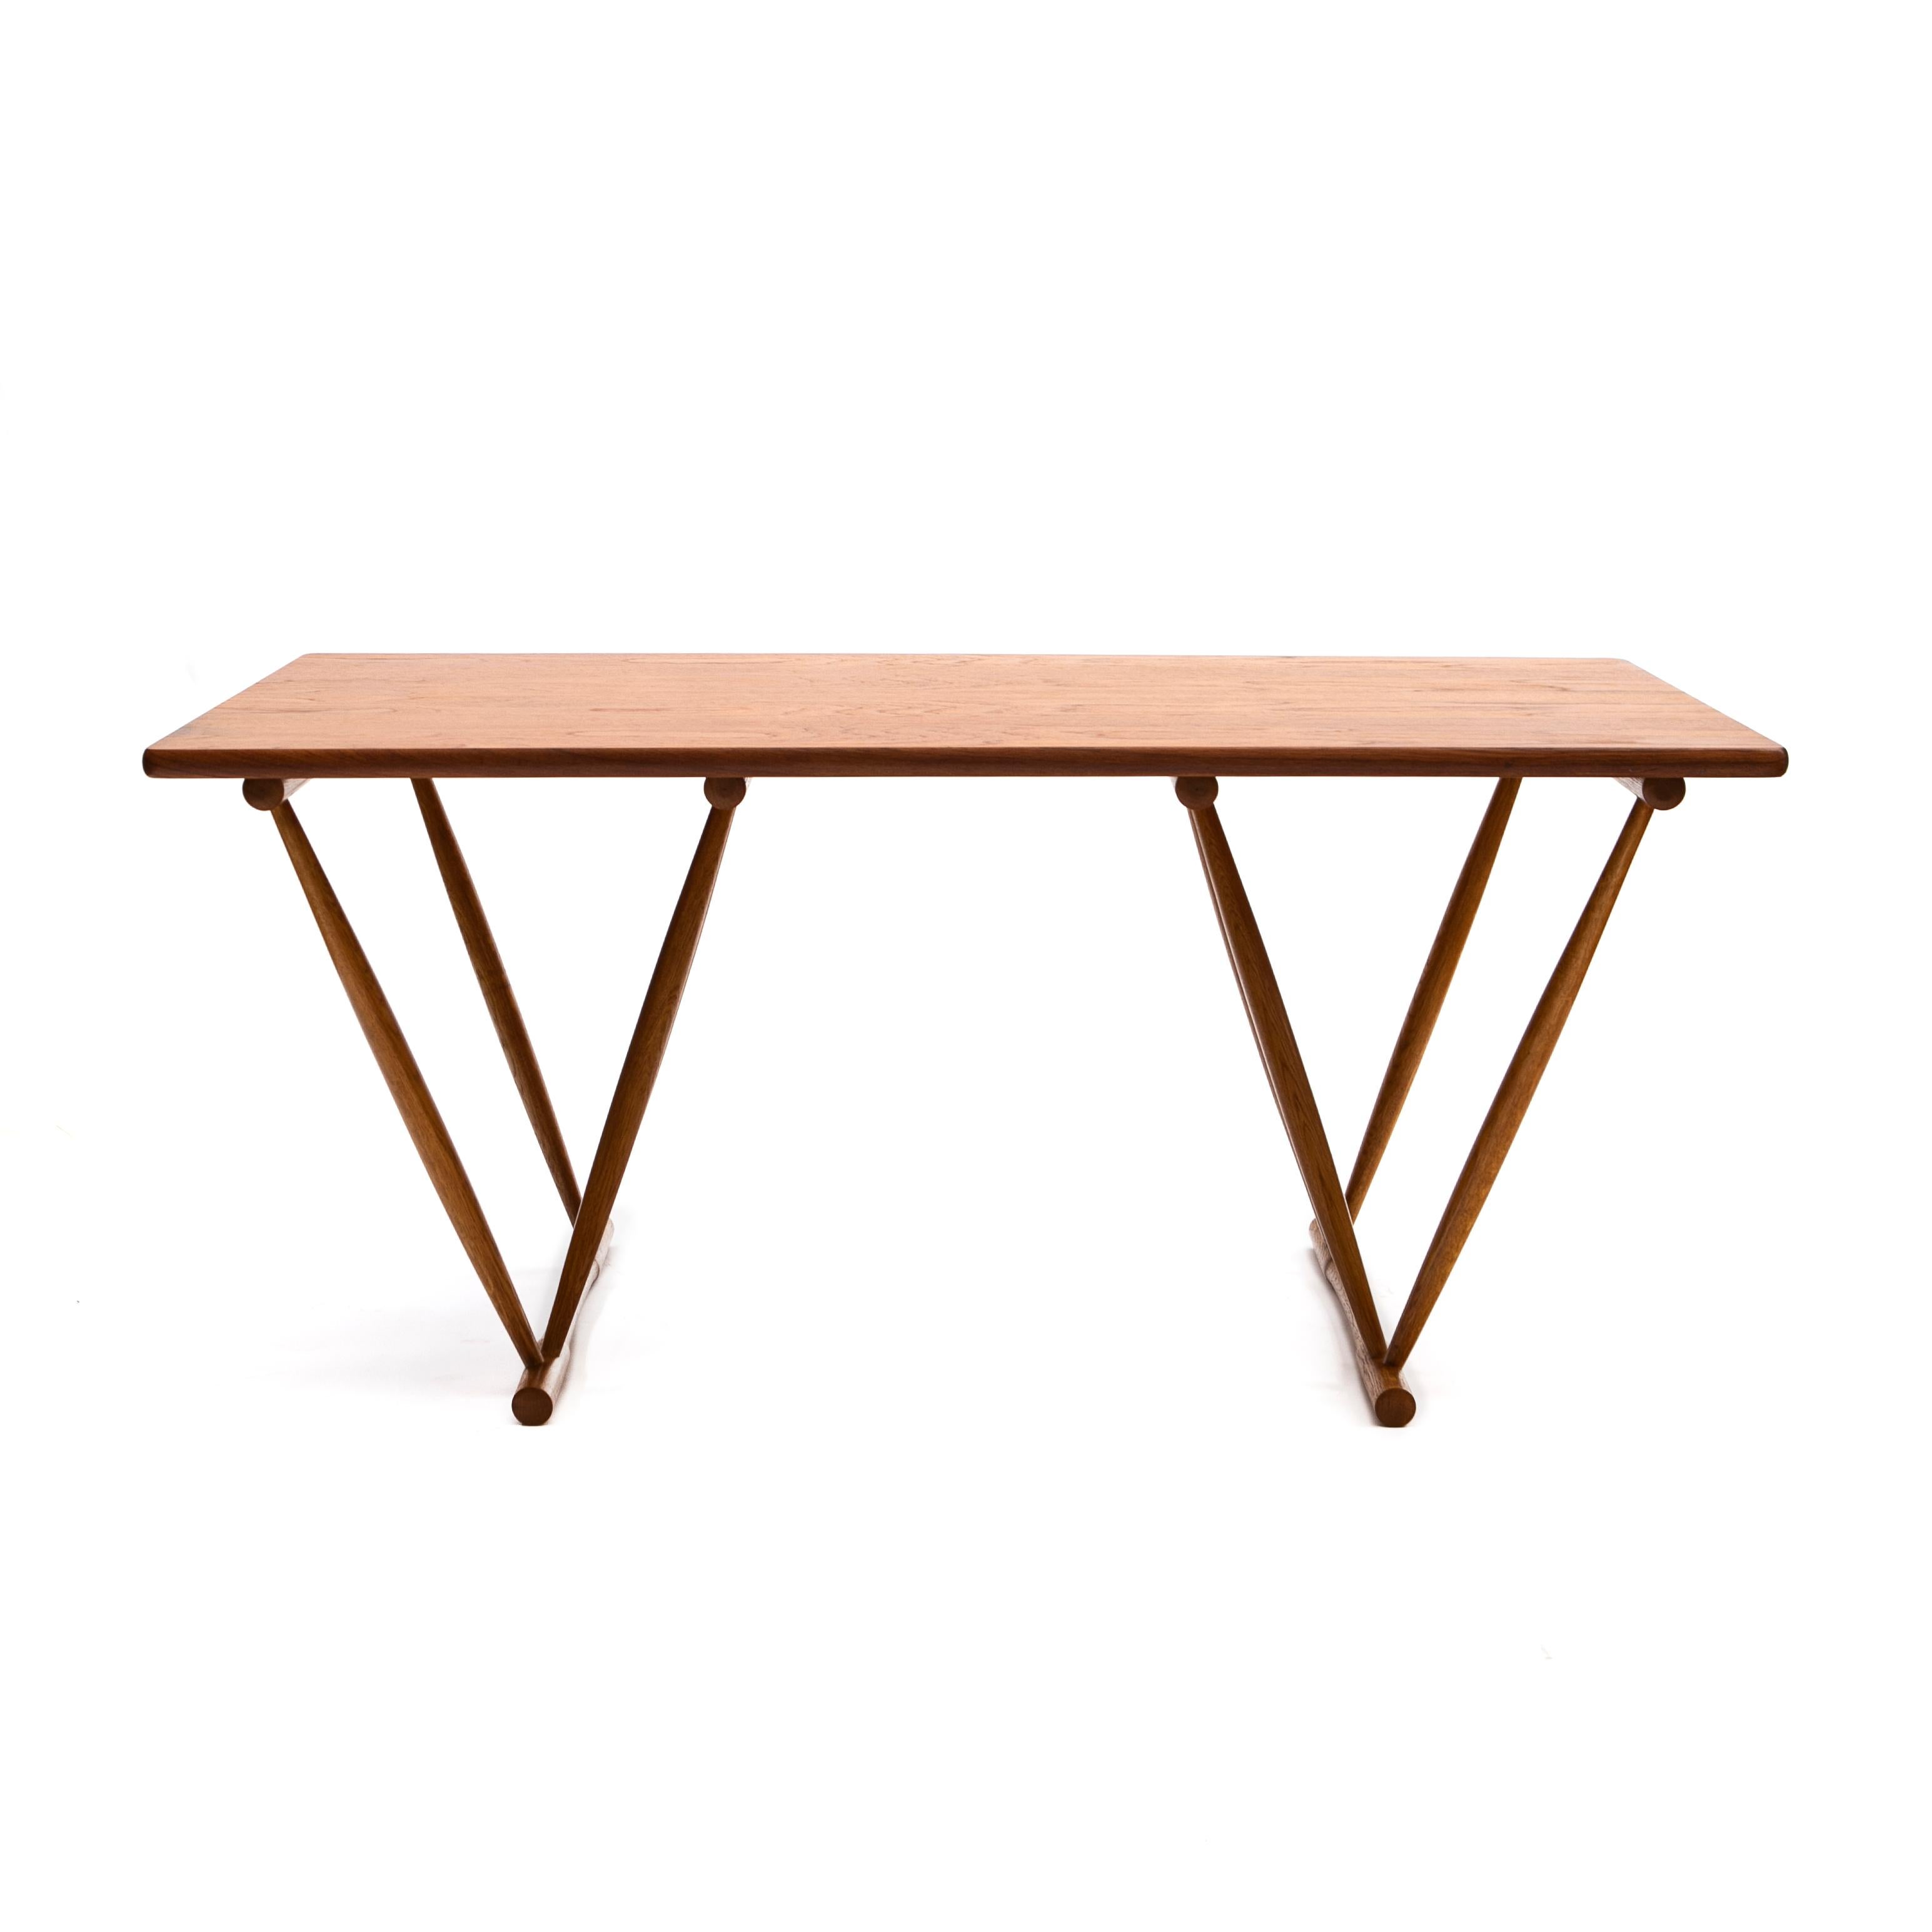 Frode Holm.
Work table / dining table with sculptural V-shaped frame and a rectangular top.

Table top in teak, legs in oak finished with teak floor stretchers.

Designed 1944.
Manufactured for retailer Illums Bolighus.
Denmark 1960-1970.